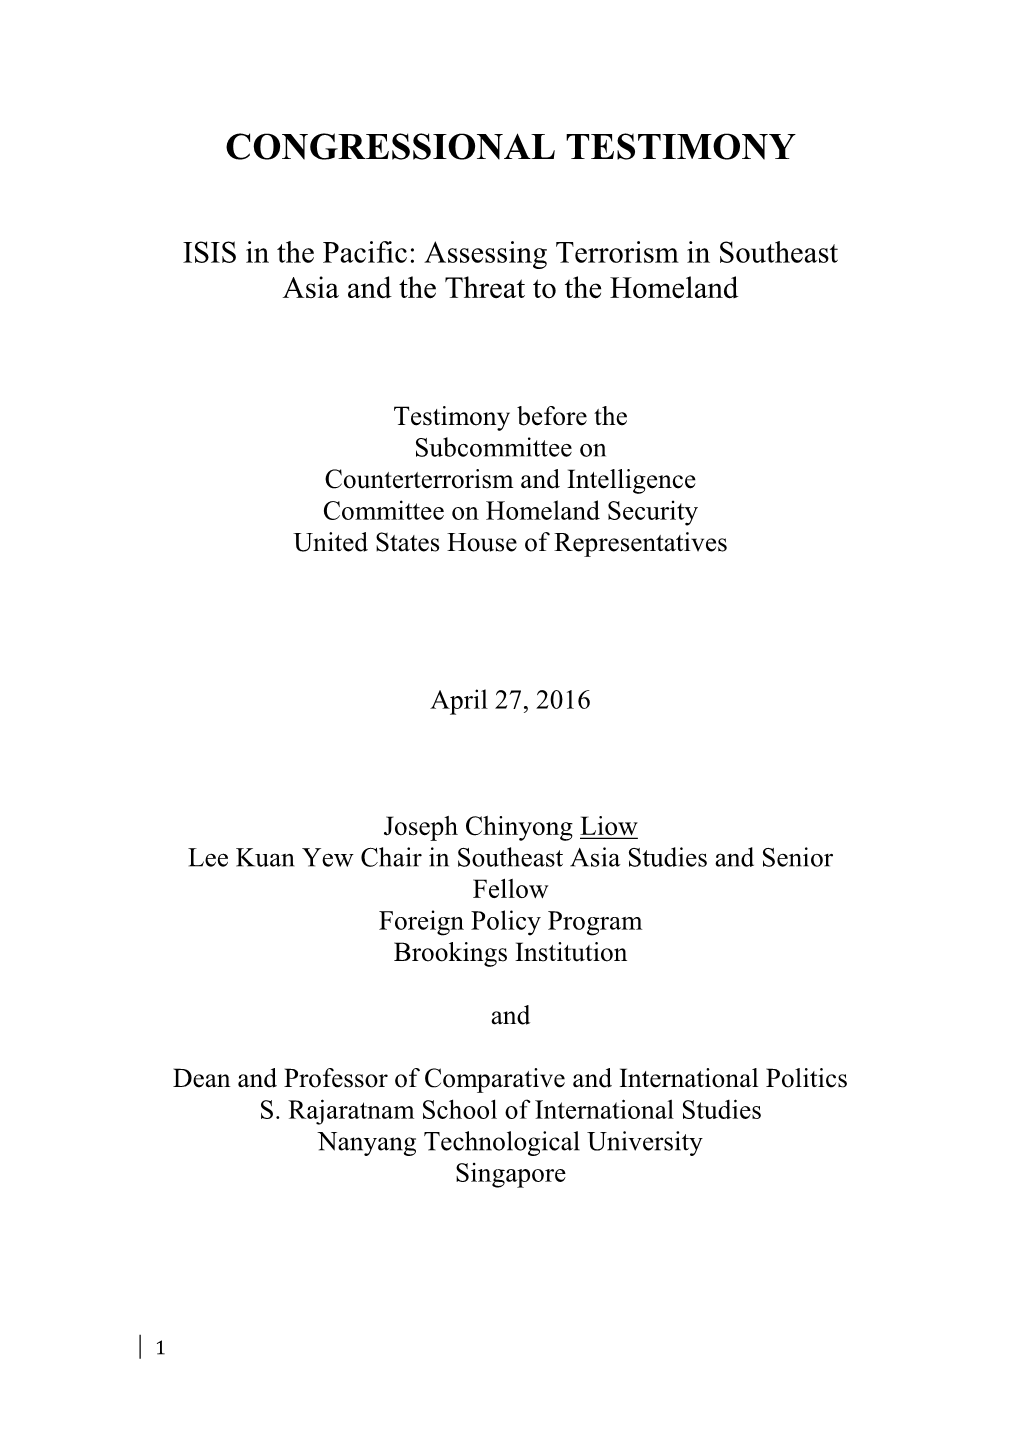 ISIS in the Pacific: Assessing Terrorism in Southeast Asia and the Threat to the Homeland